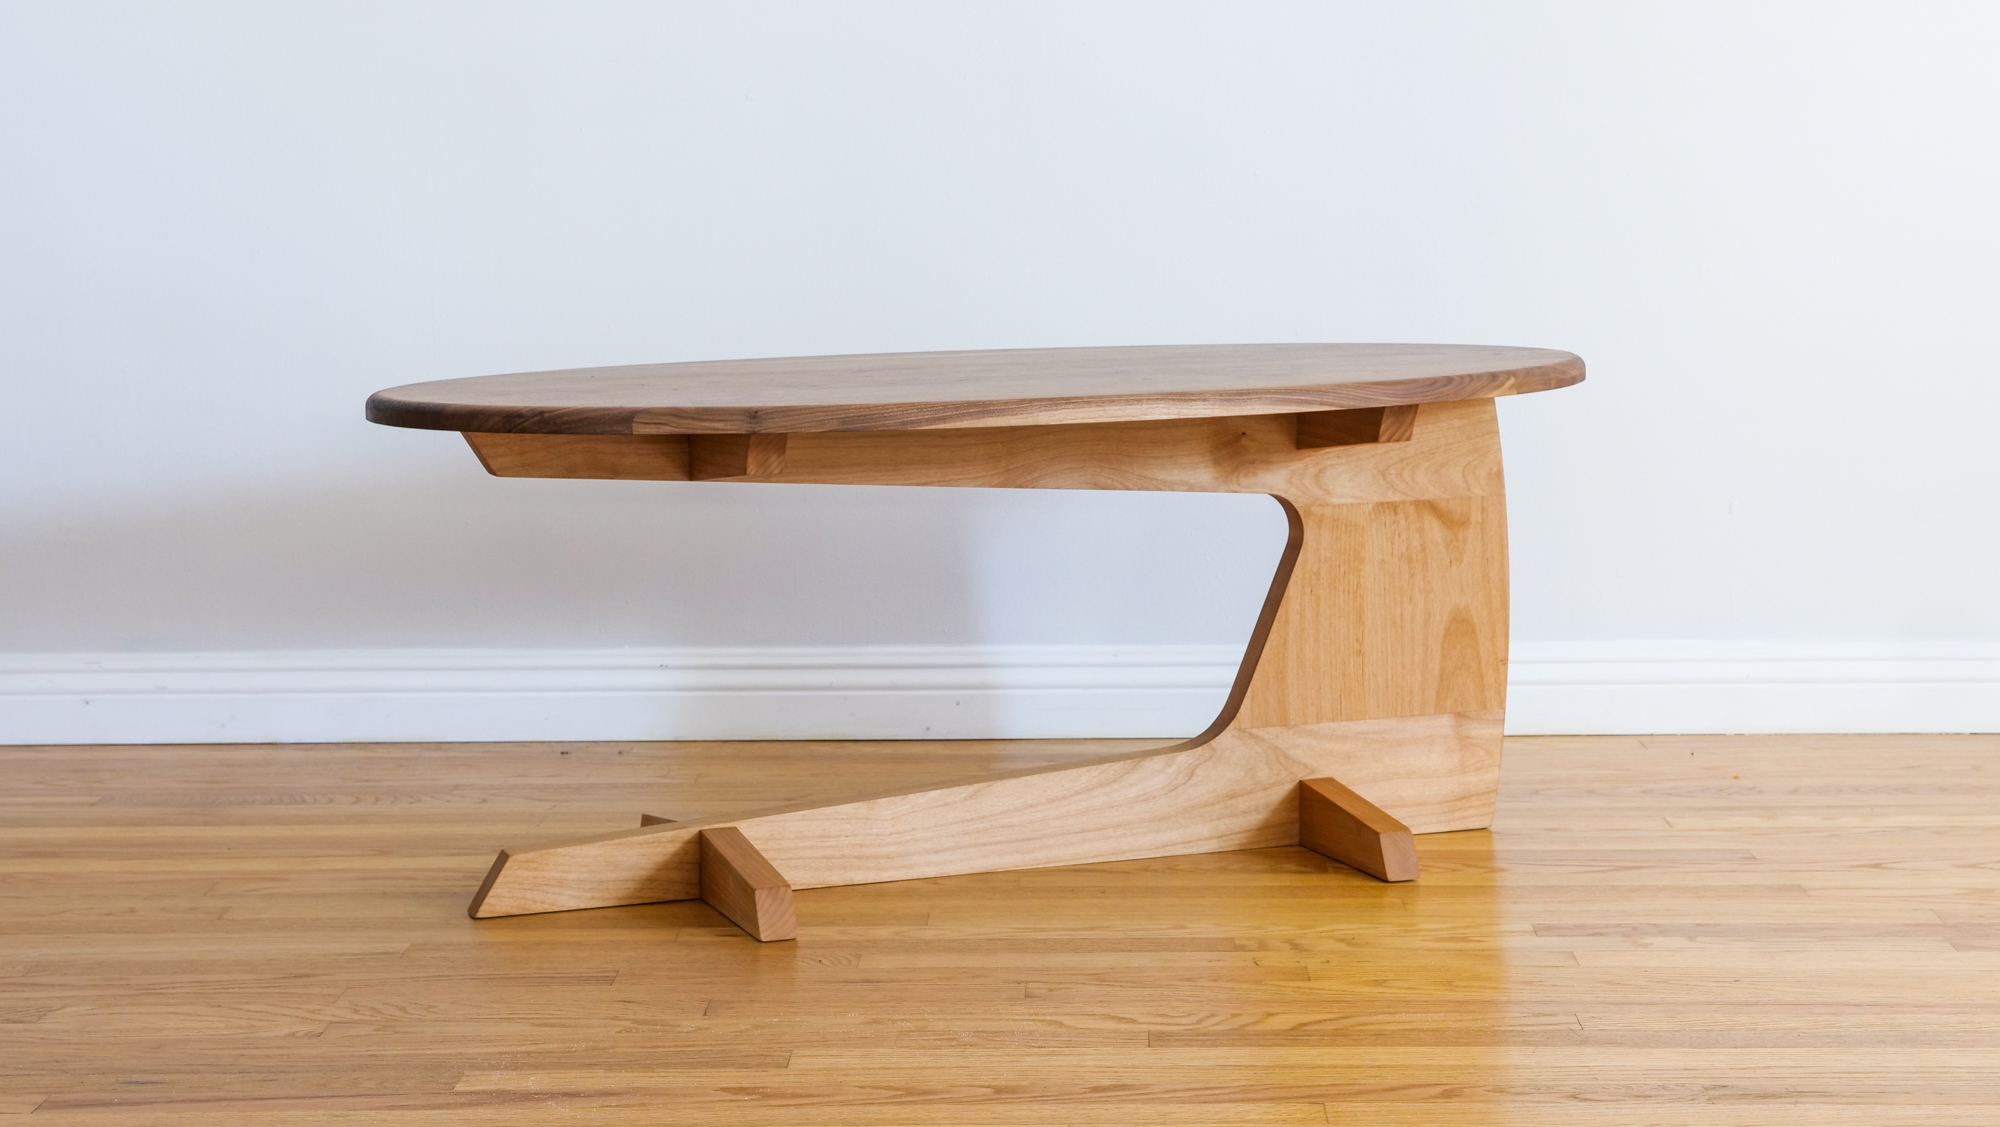 Cantilever Coffee Table Shaun Boyd Made This